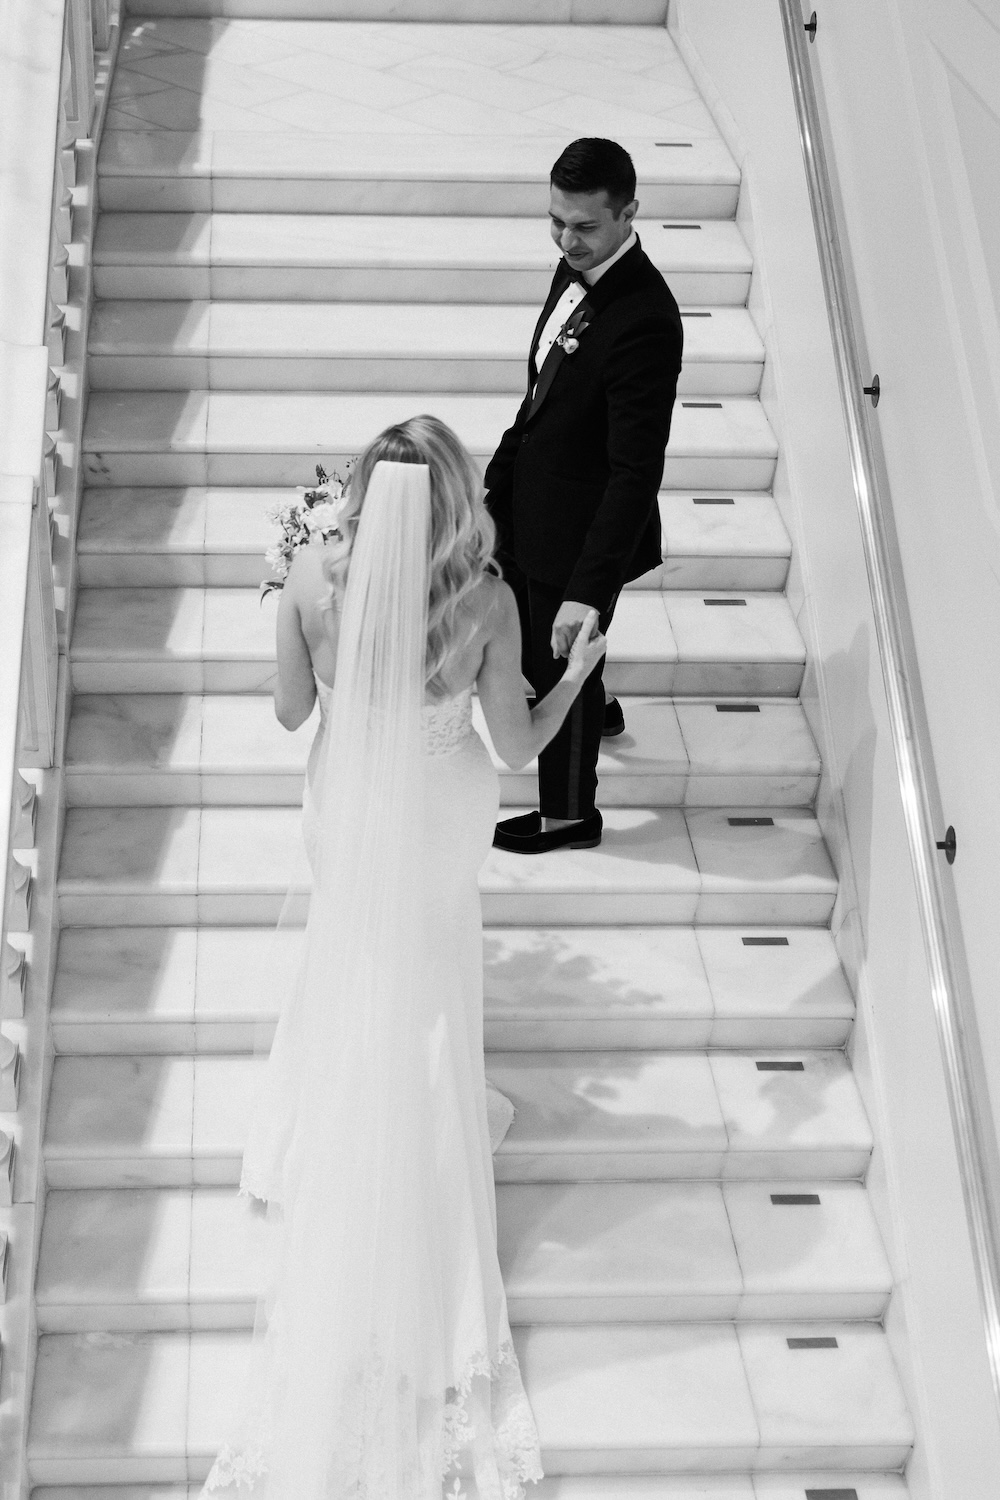 bride and groom walking up staircase. Modern Washington DC wedding at National Museum of Women in the Arts. Sarah Bradshaw Photography.